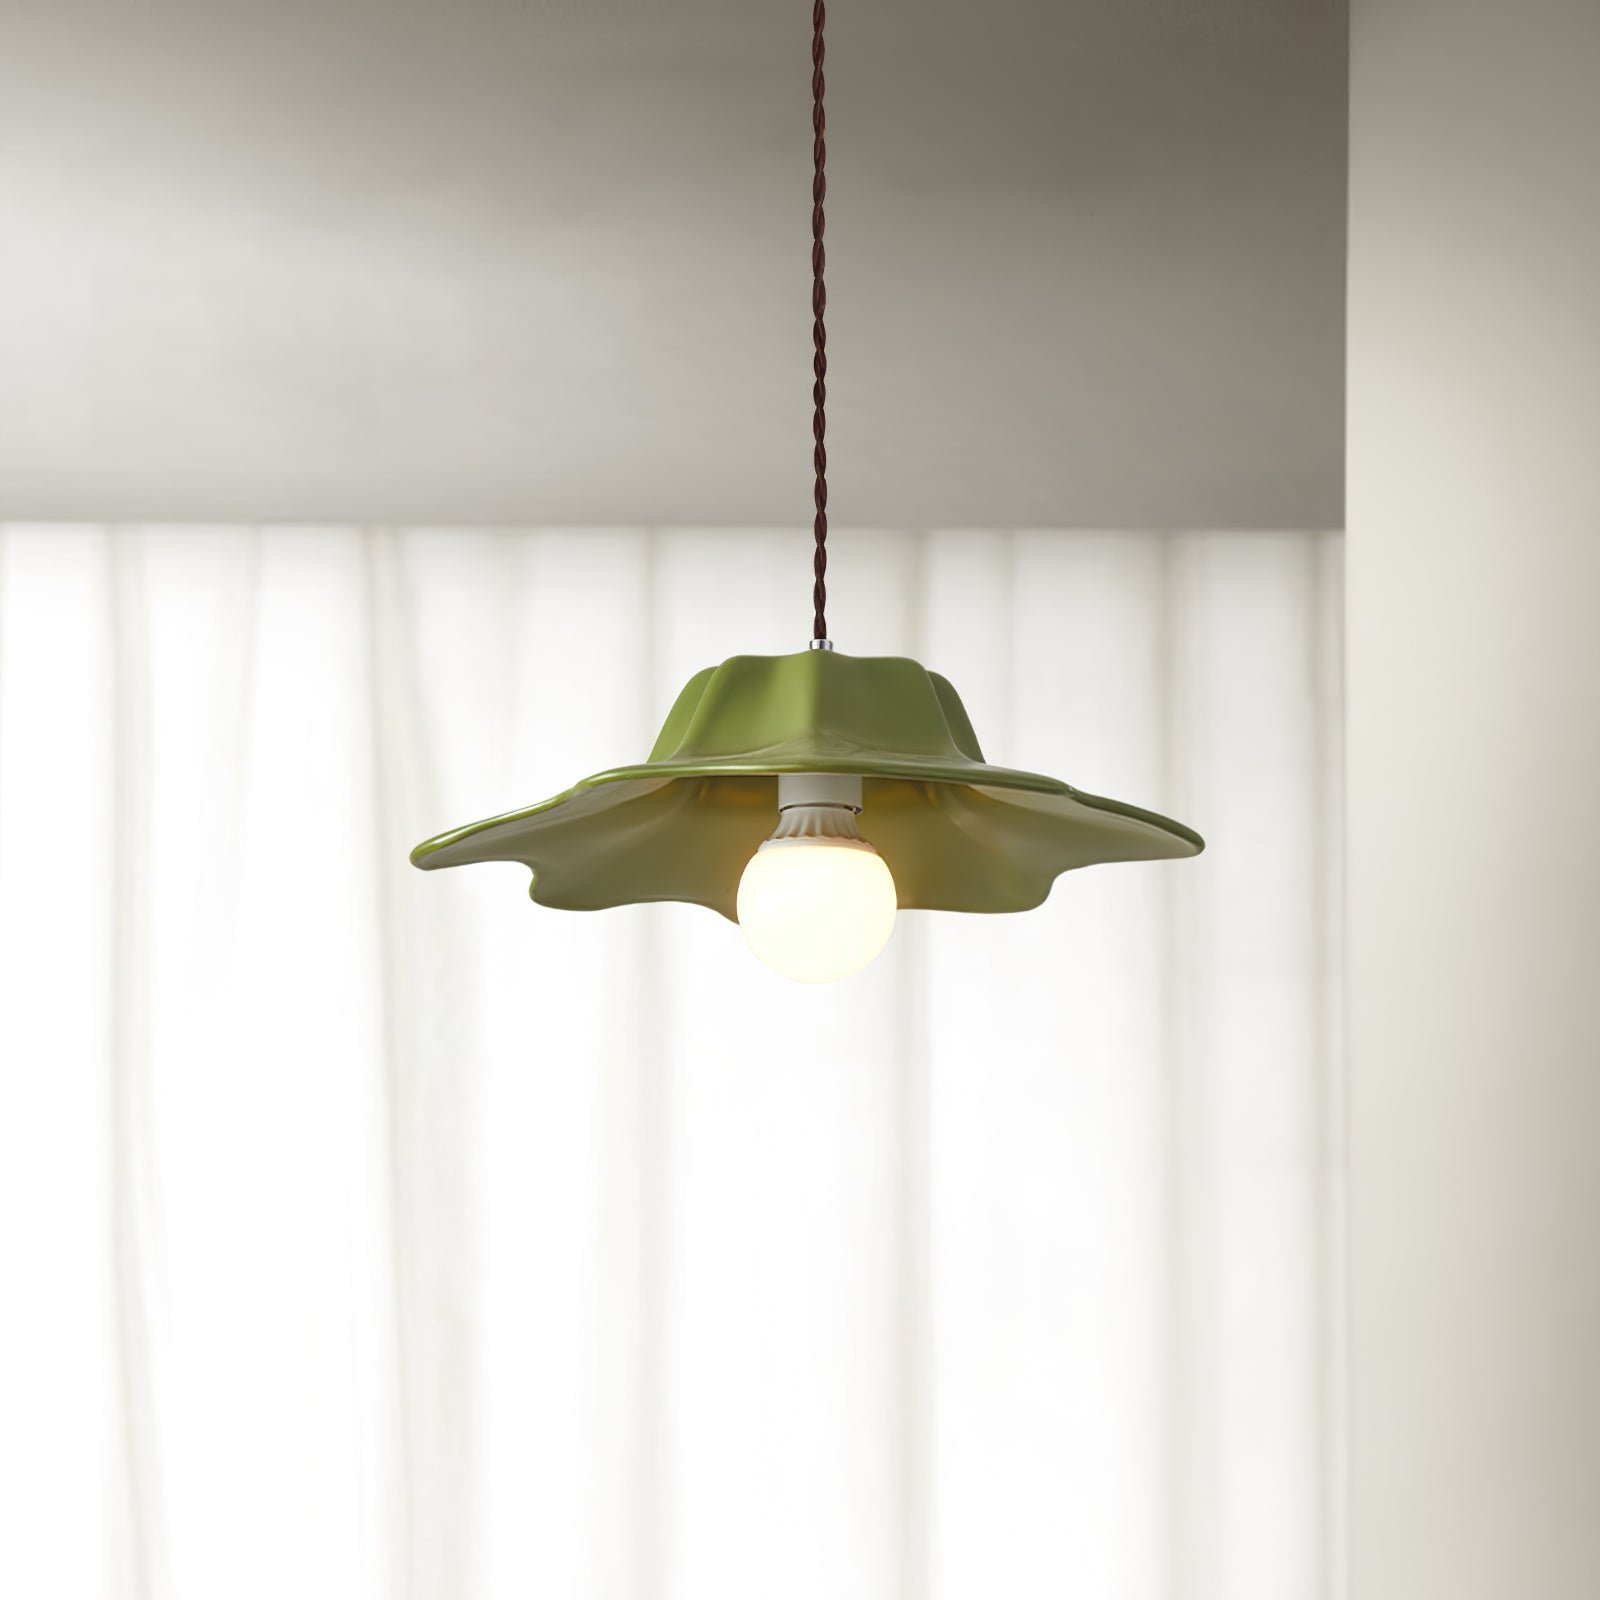 Alien Green Pendant Lamp measuring 16.5 inches in diameter and 3.9 inches in height (42cm x 10cm).